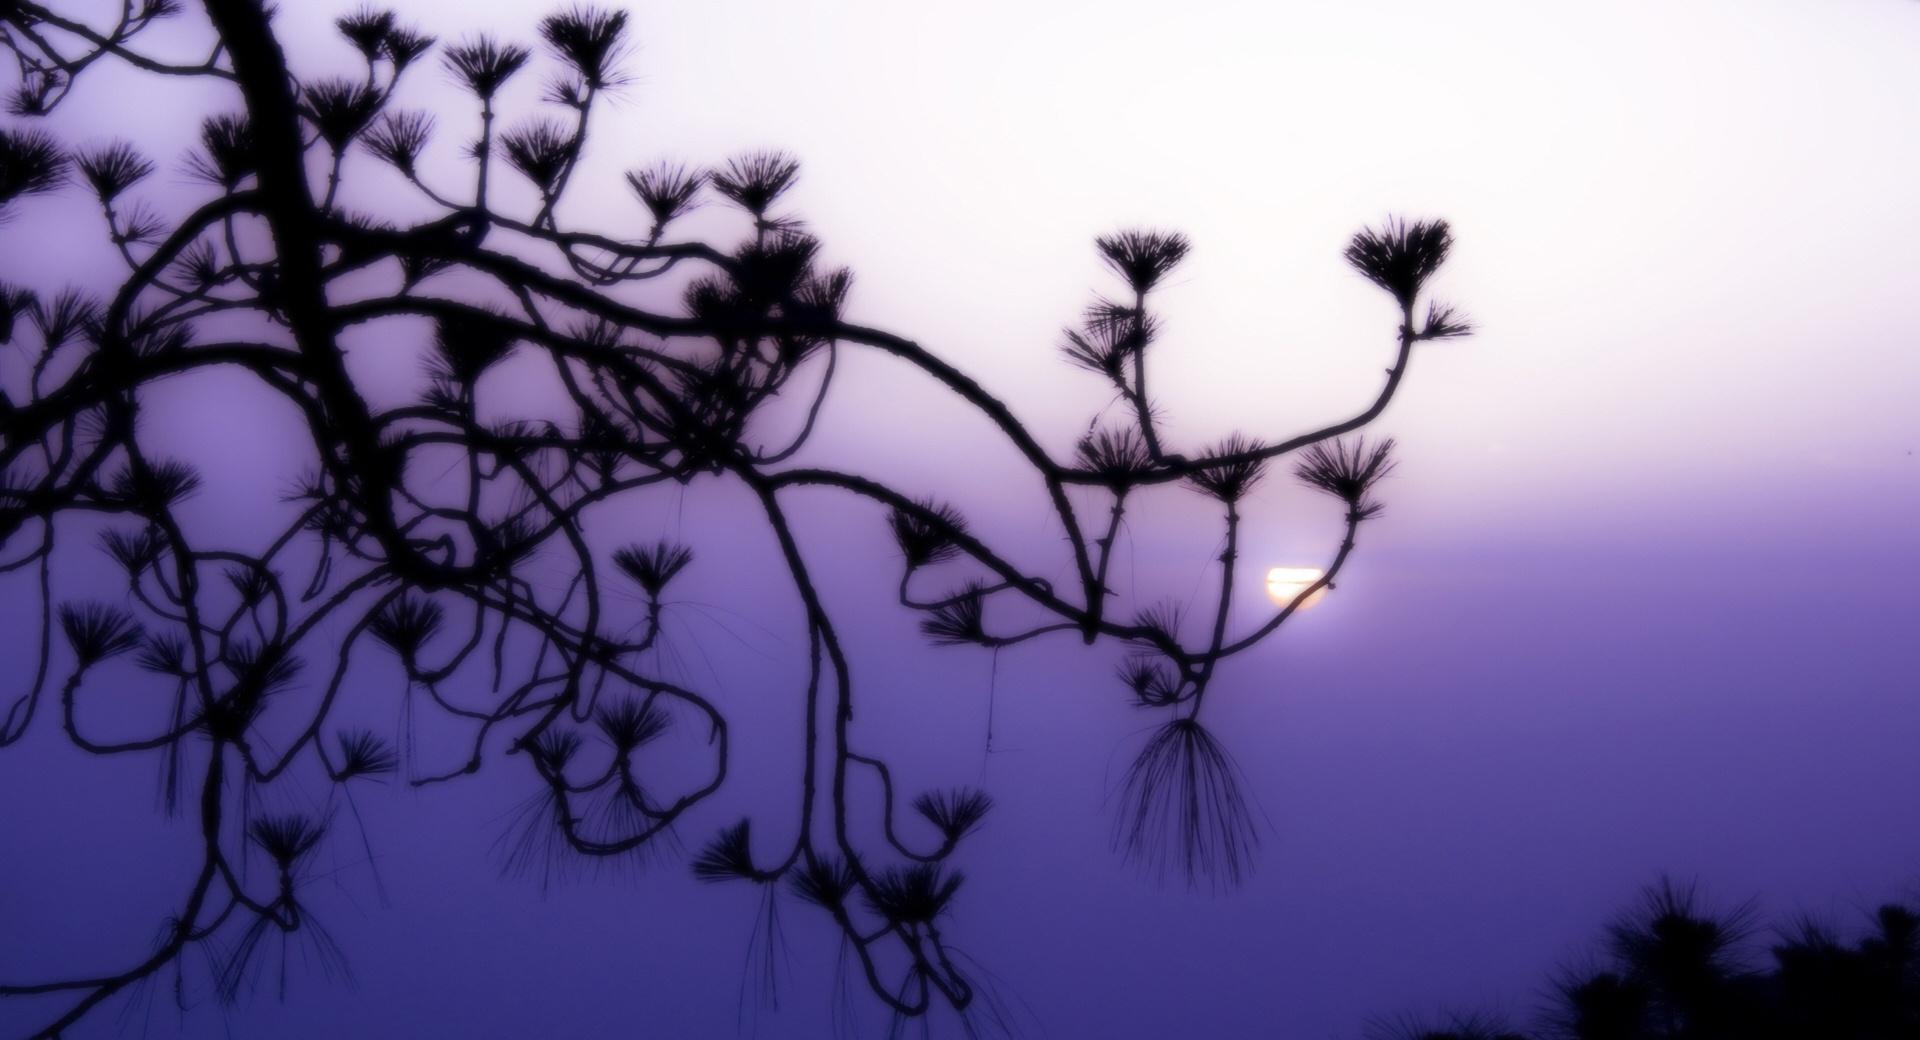 Tree Branch Silhouette at Dusk wallpapers HD quality